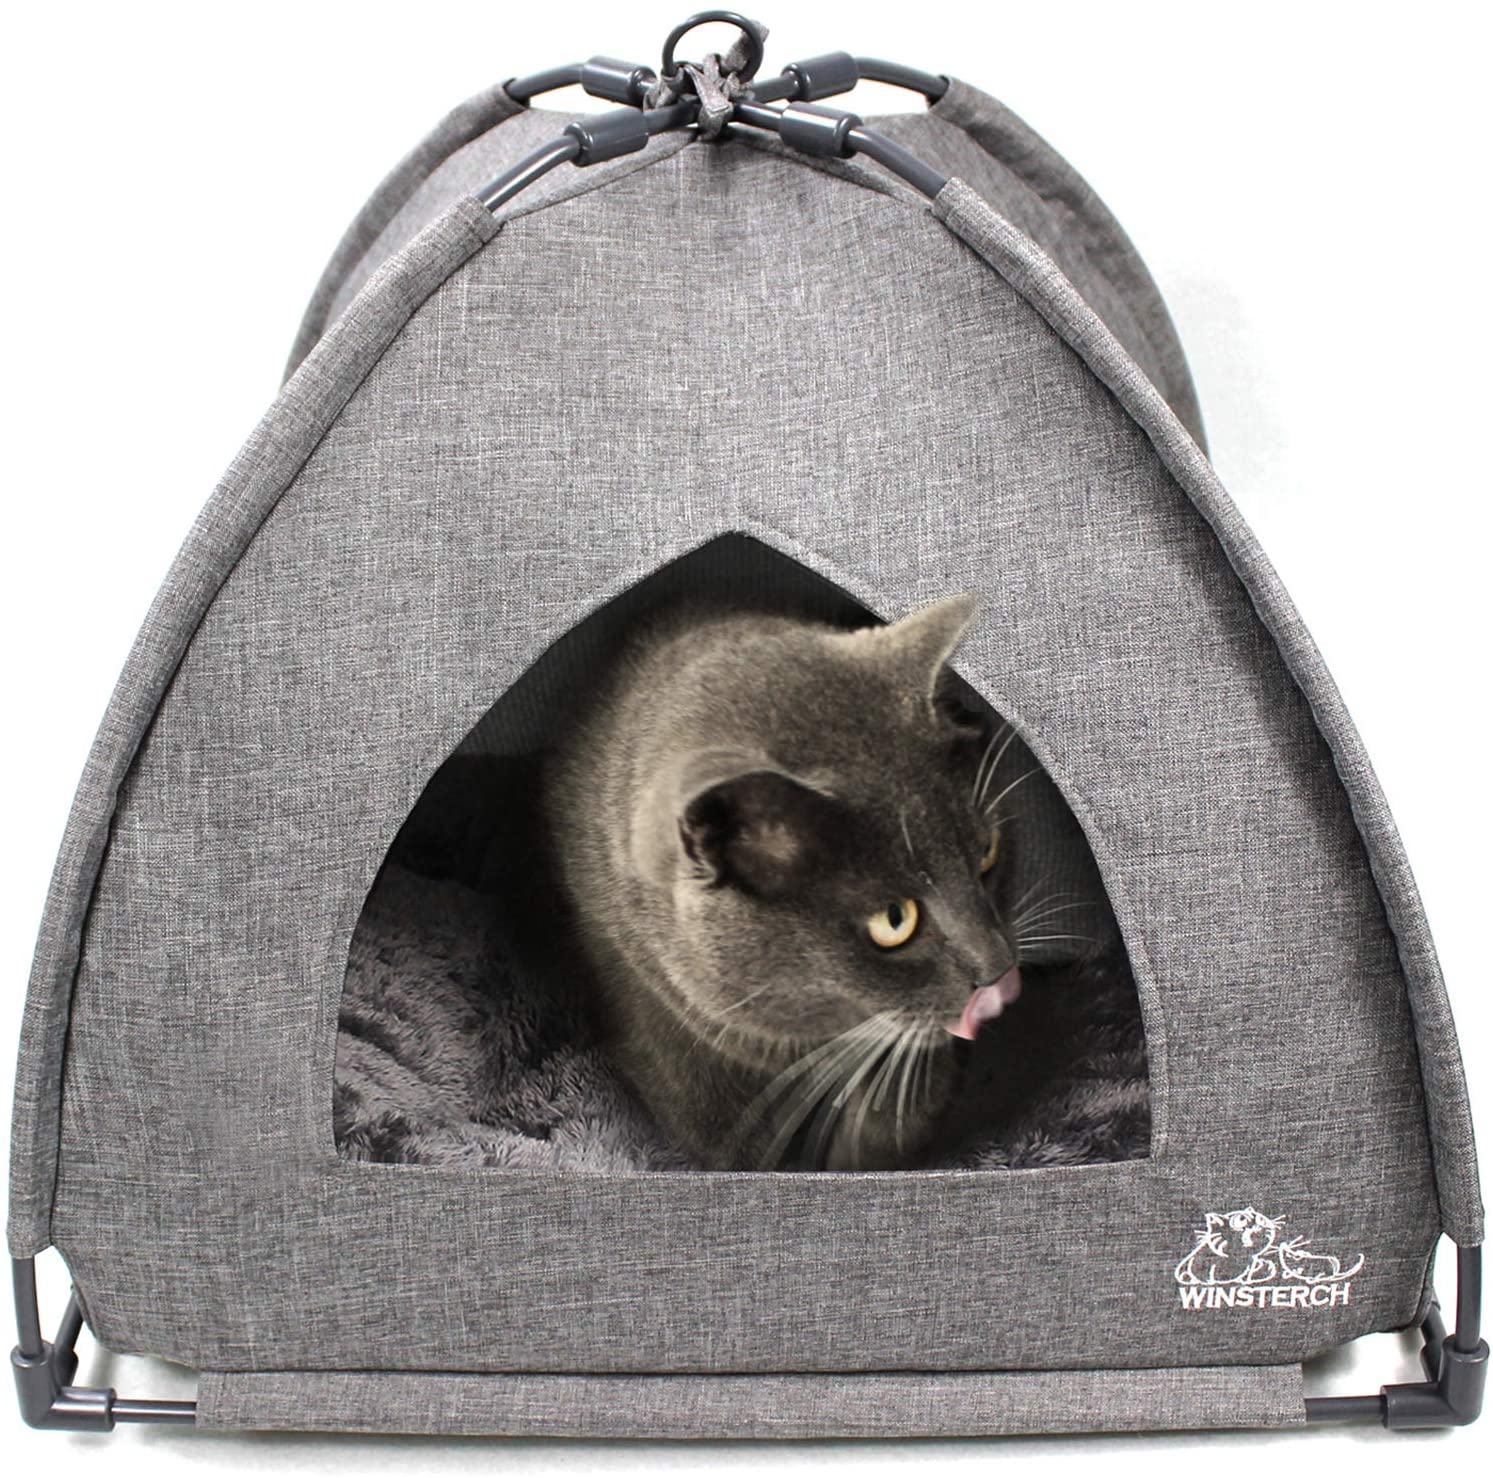 Winsterch Cat Bed Cave